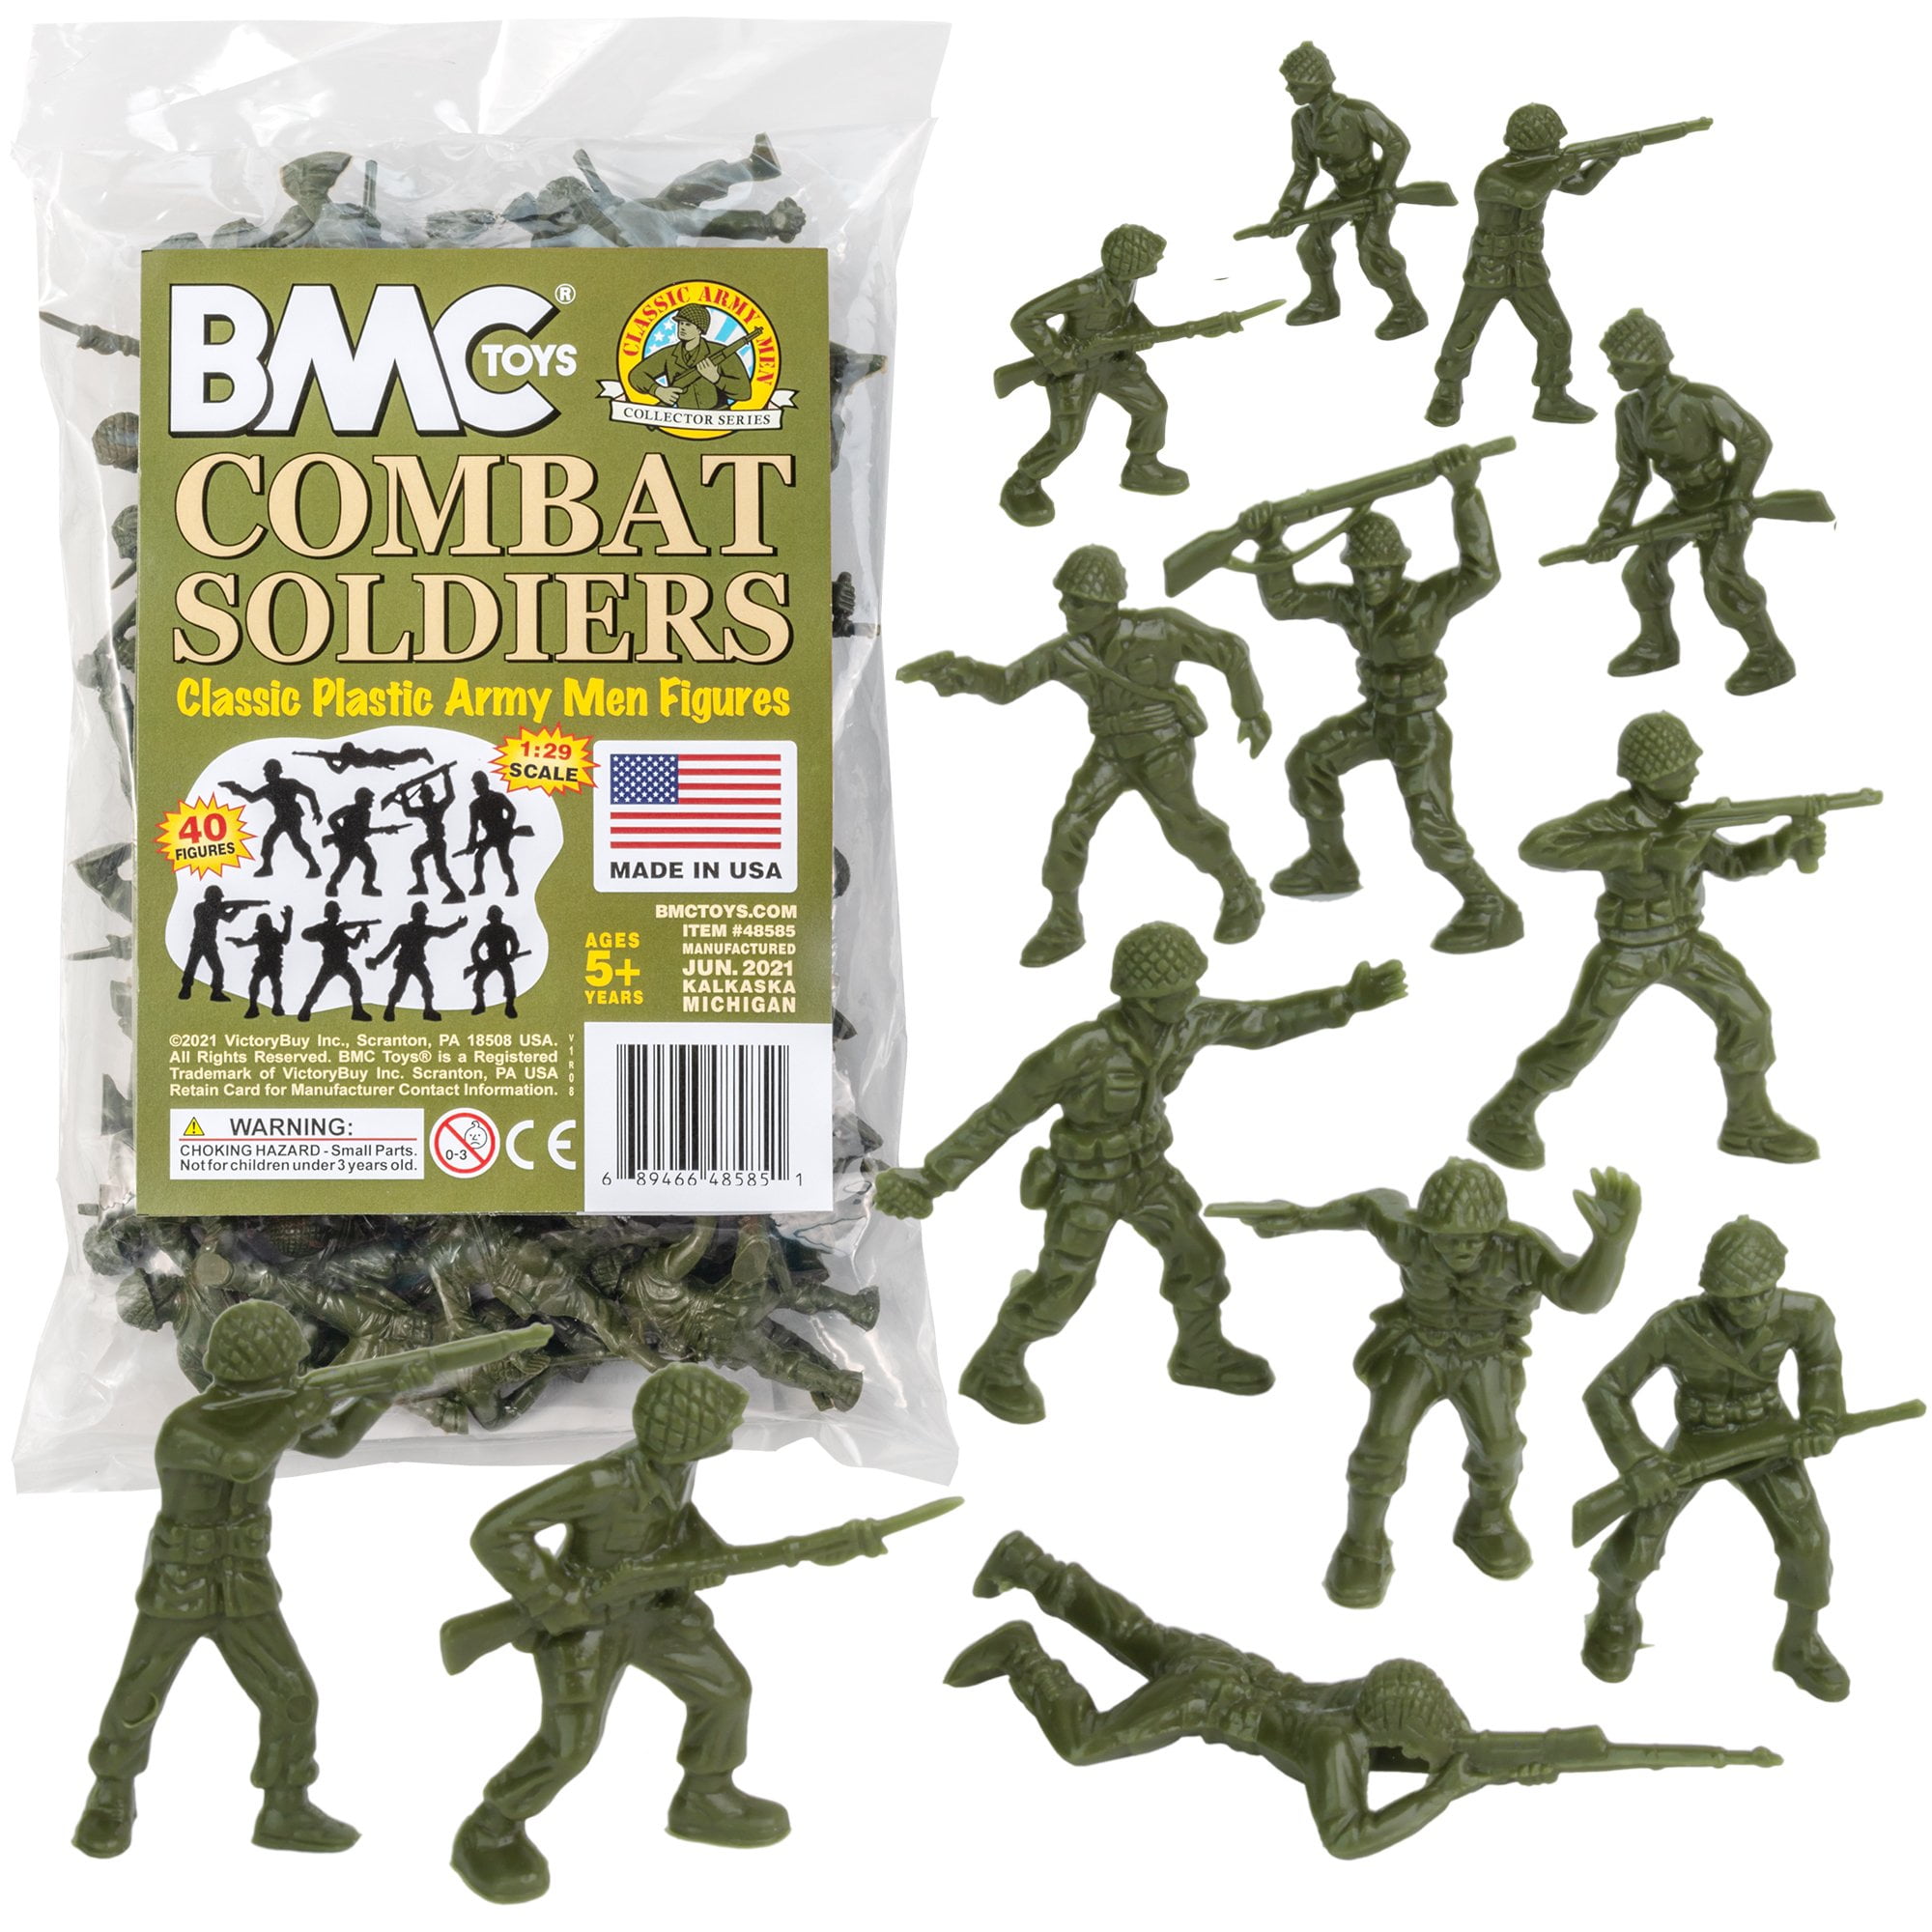 Nade in Usa Timmee Plastic Army Men Green VS Tan 100pc Toy Soldier Figures for sale online 